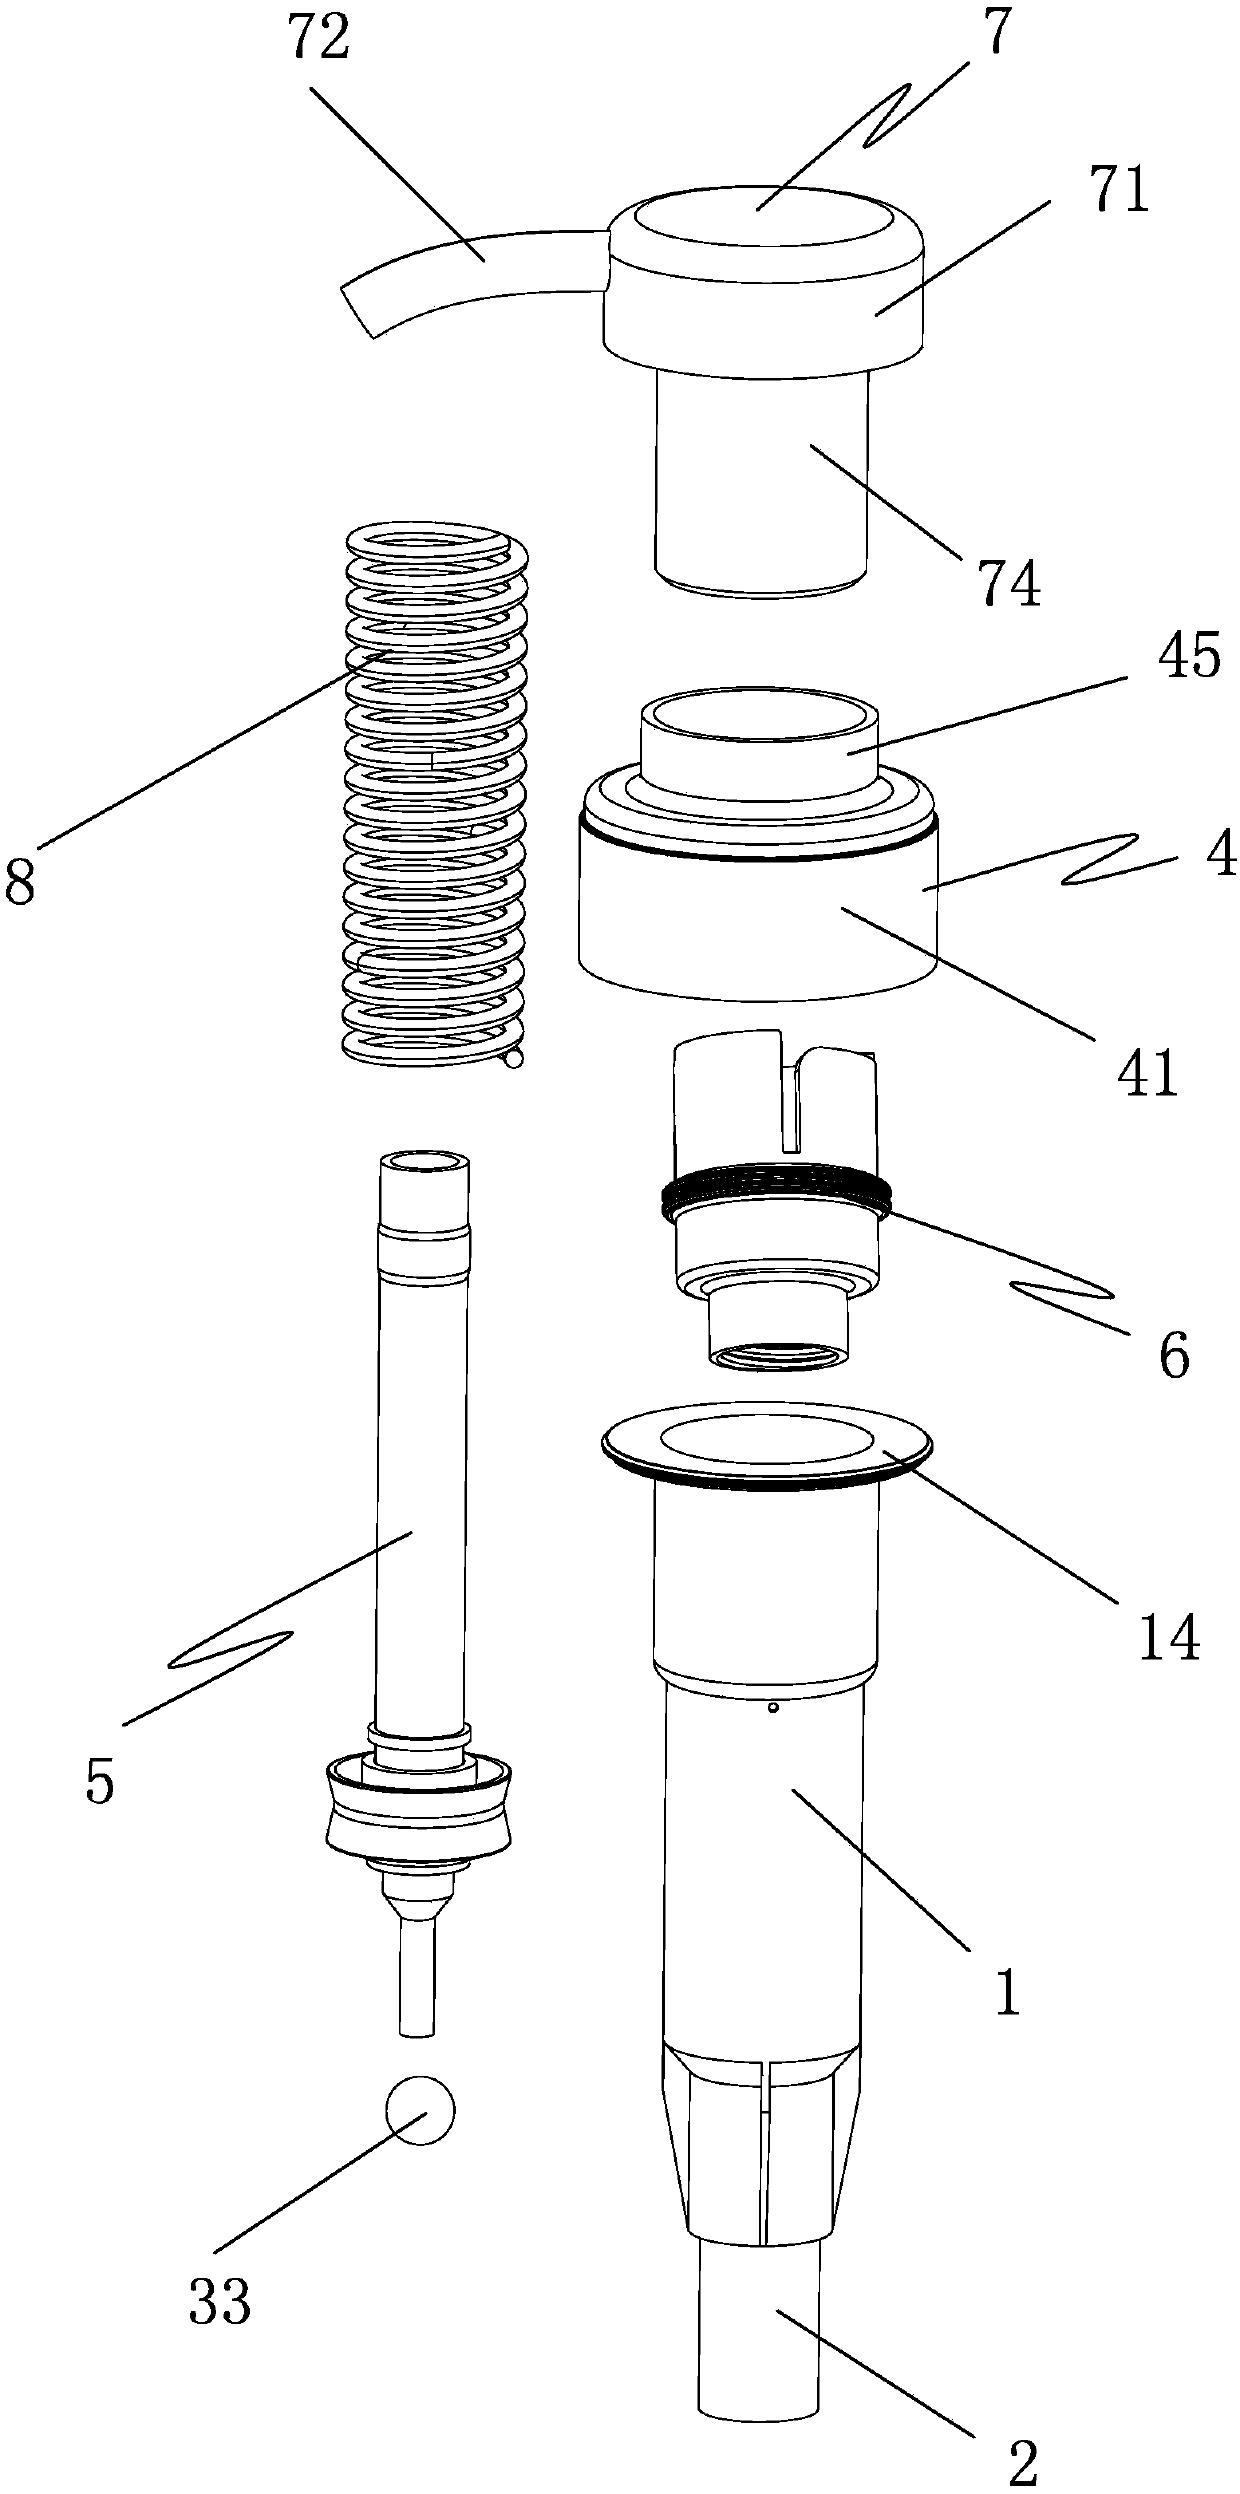 Standardized multifunctional self-locking and thread-locking liquid dispensing pump with built-in spring